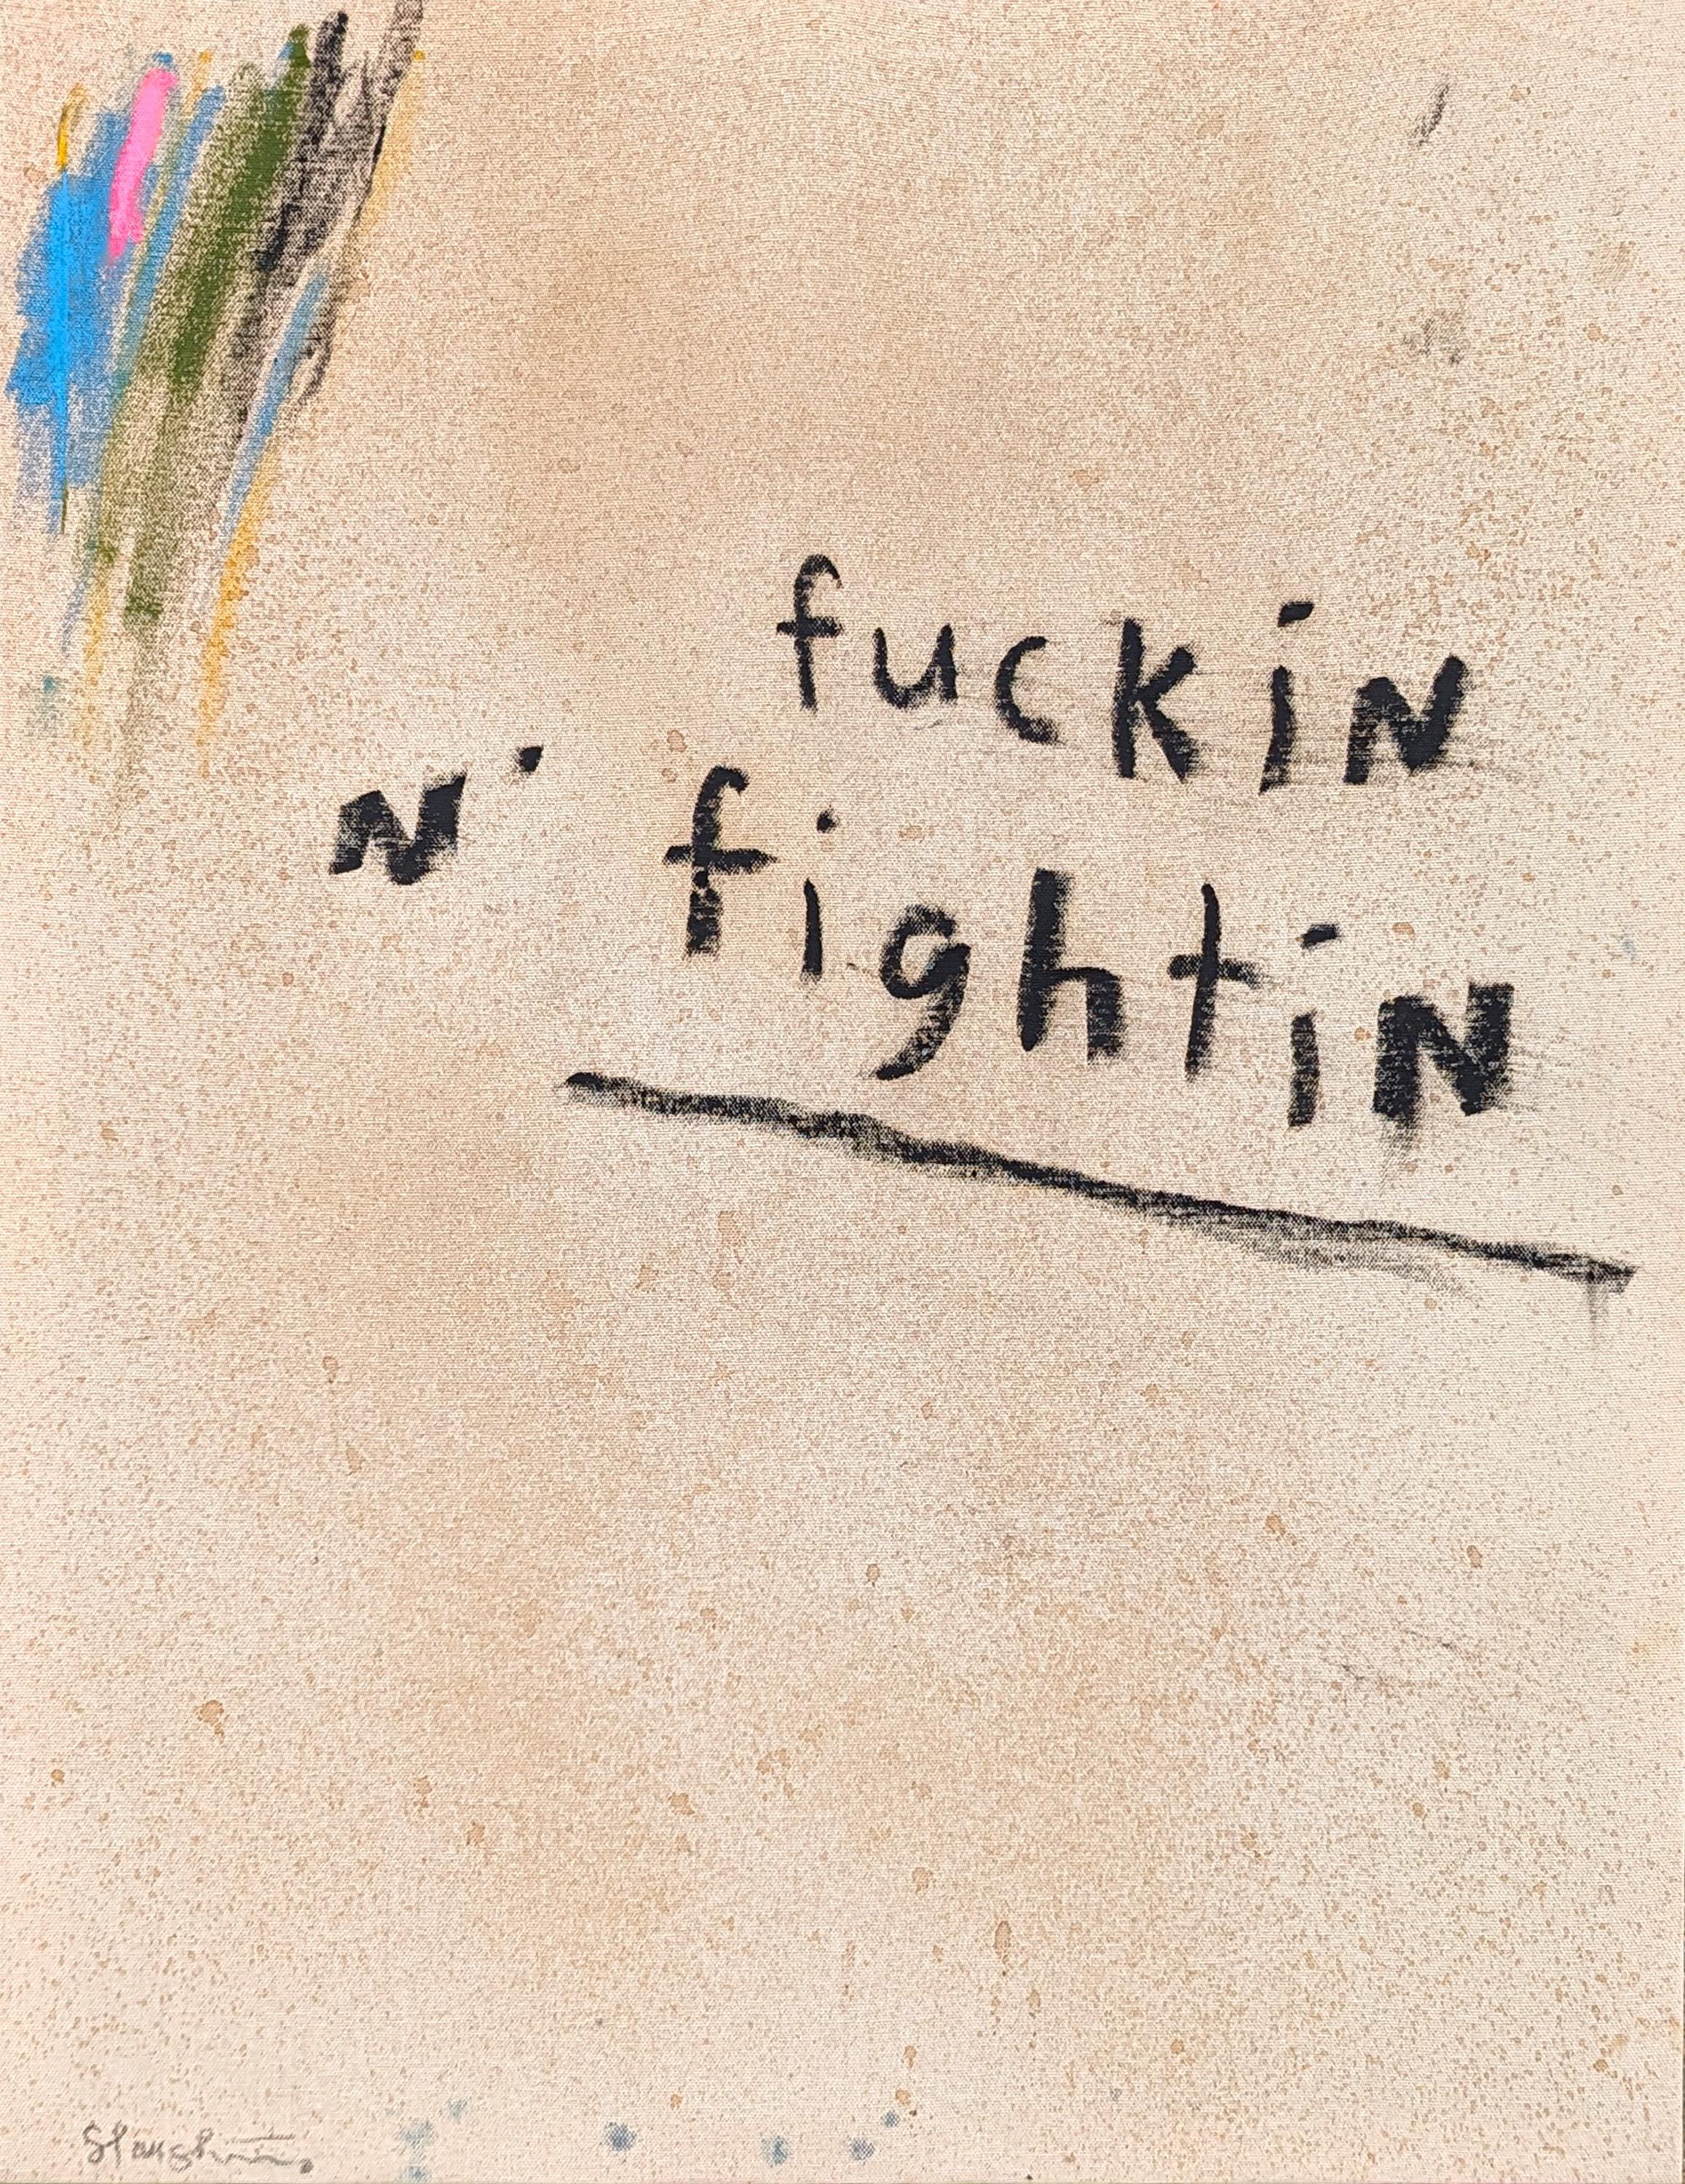 “Fuckin n' Fightin” Abstract Contemporary Black & Tan Text Painting - Art by Tra' Slaughter